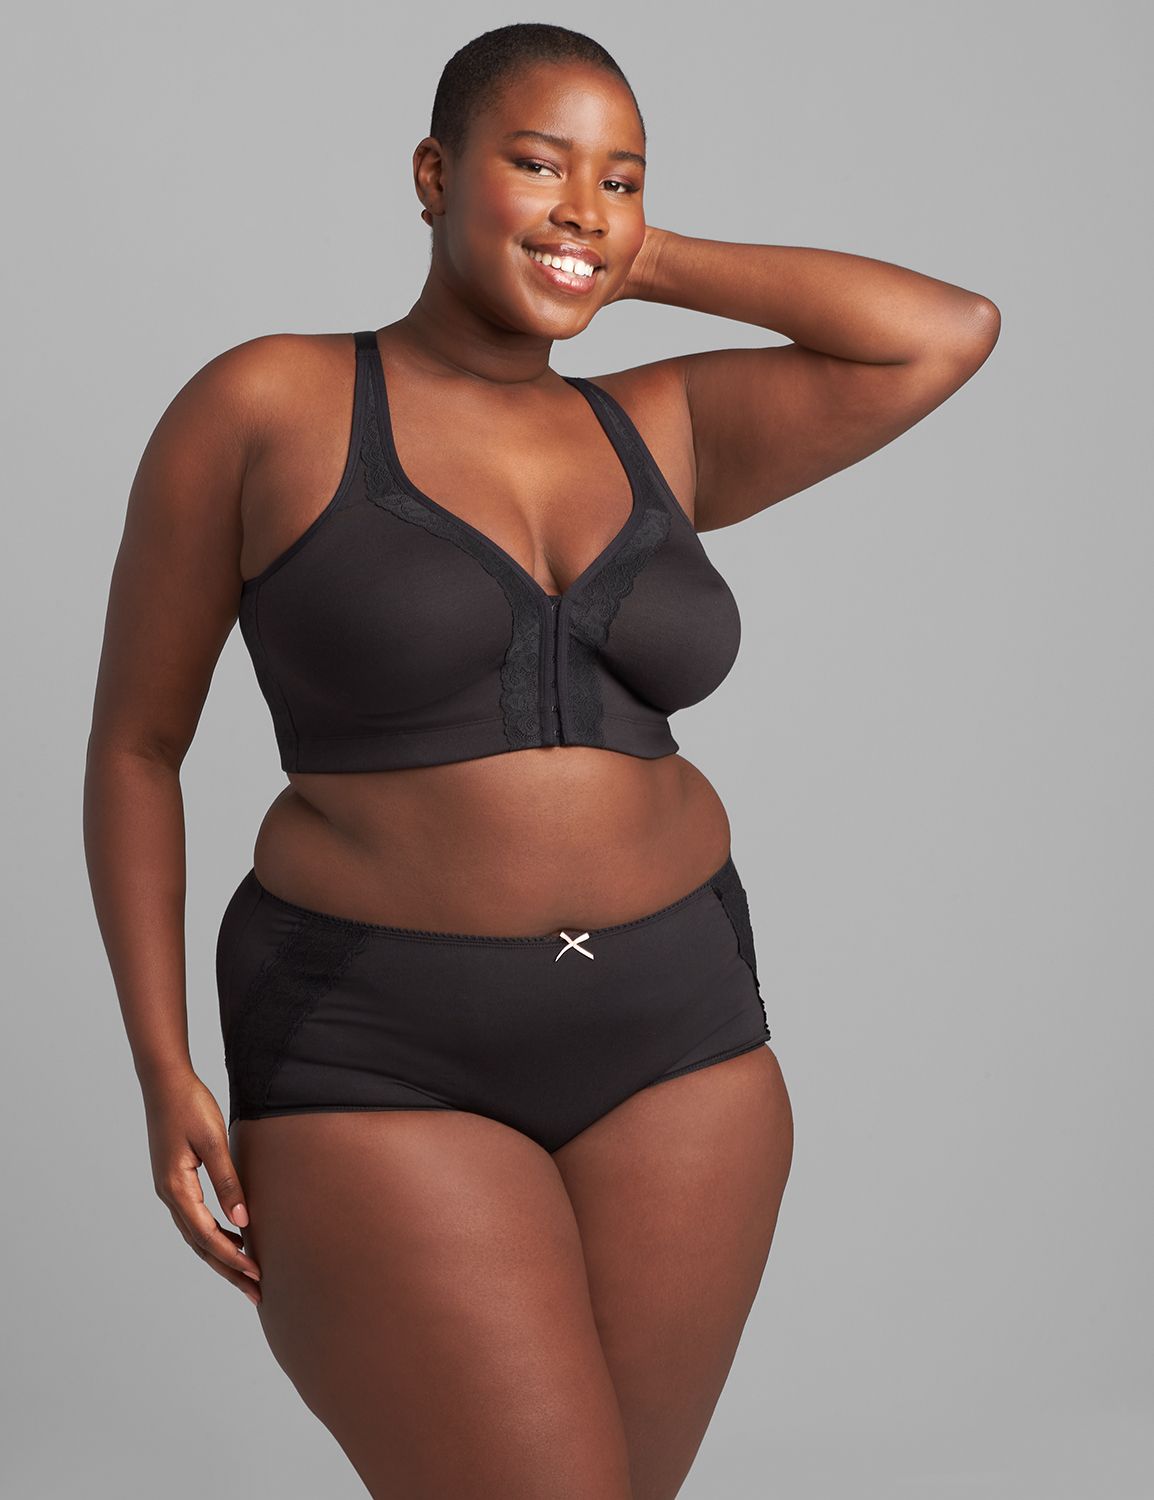 Lane Bryant - Have you heard? Cacique bras now come in 86 sizes